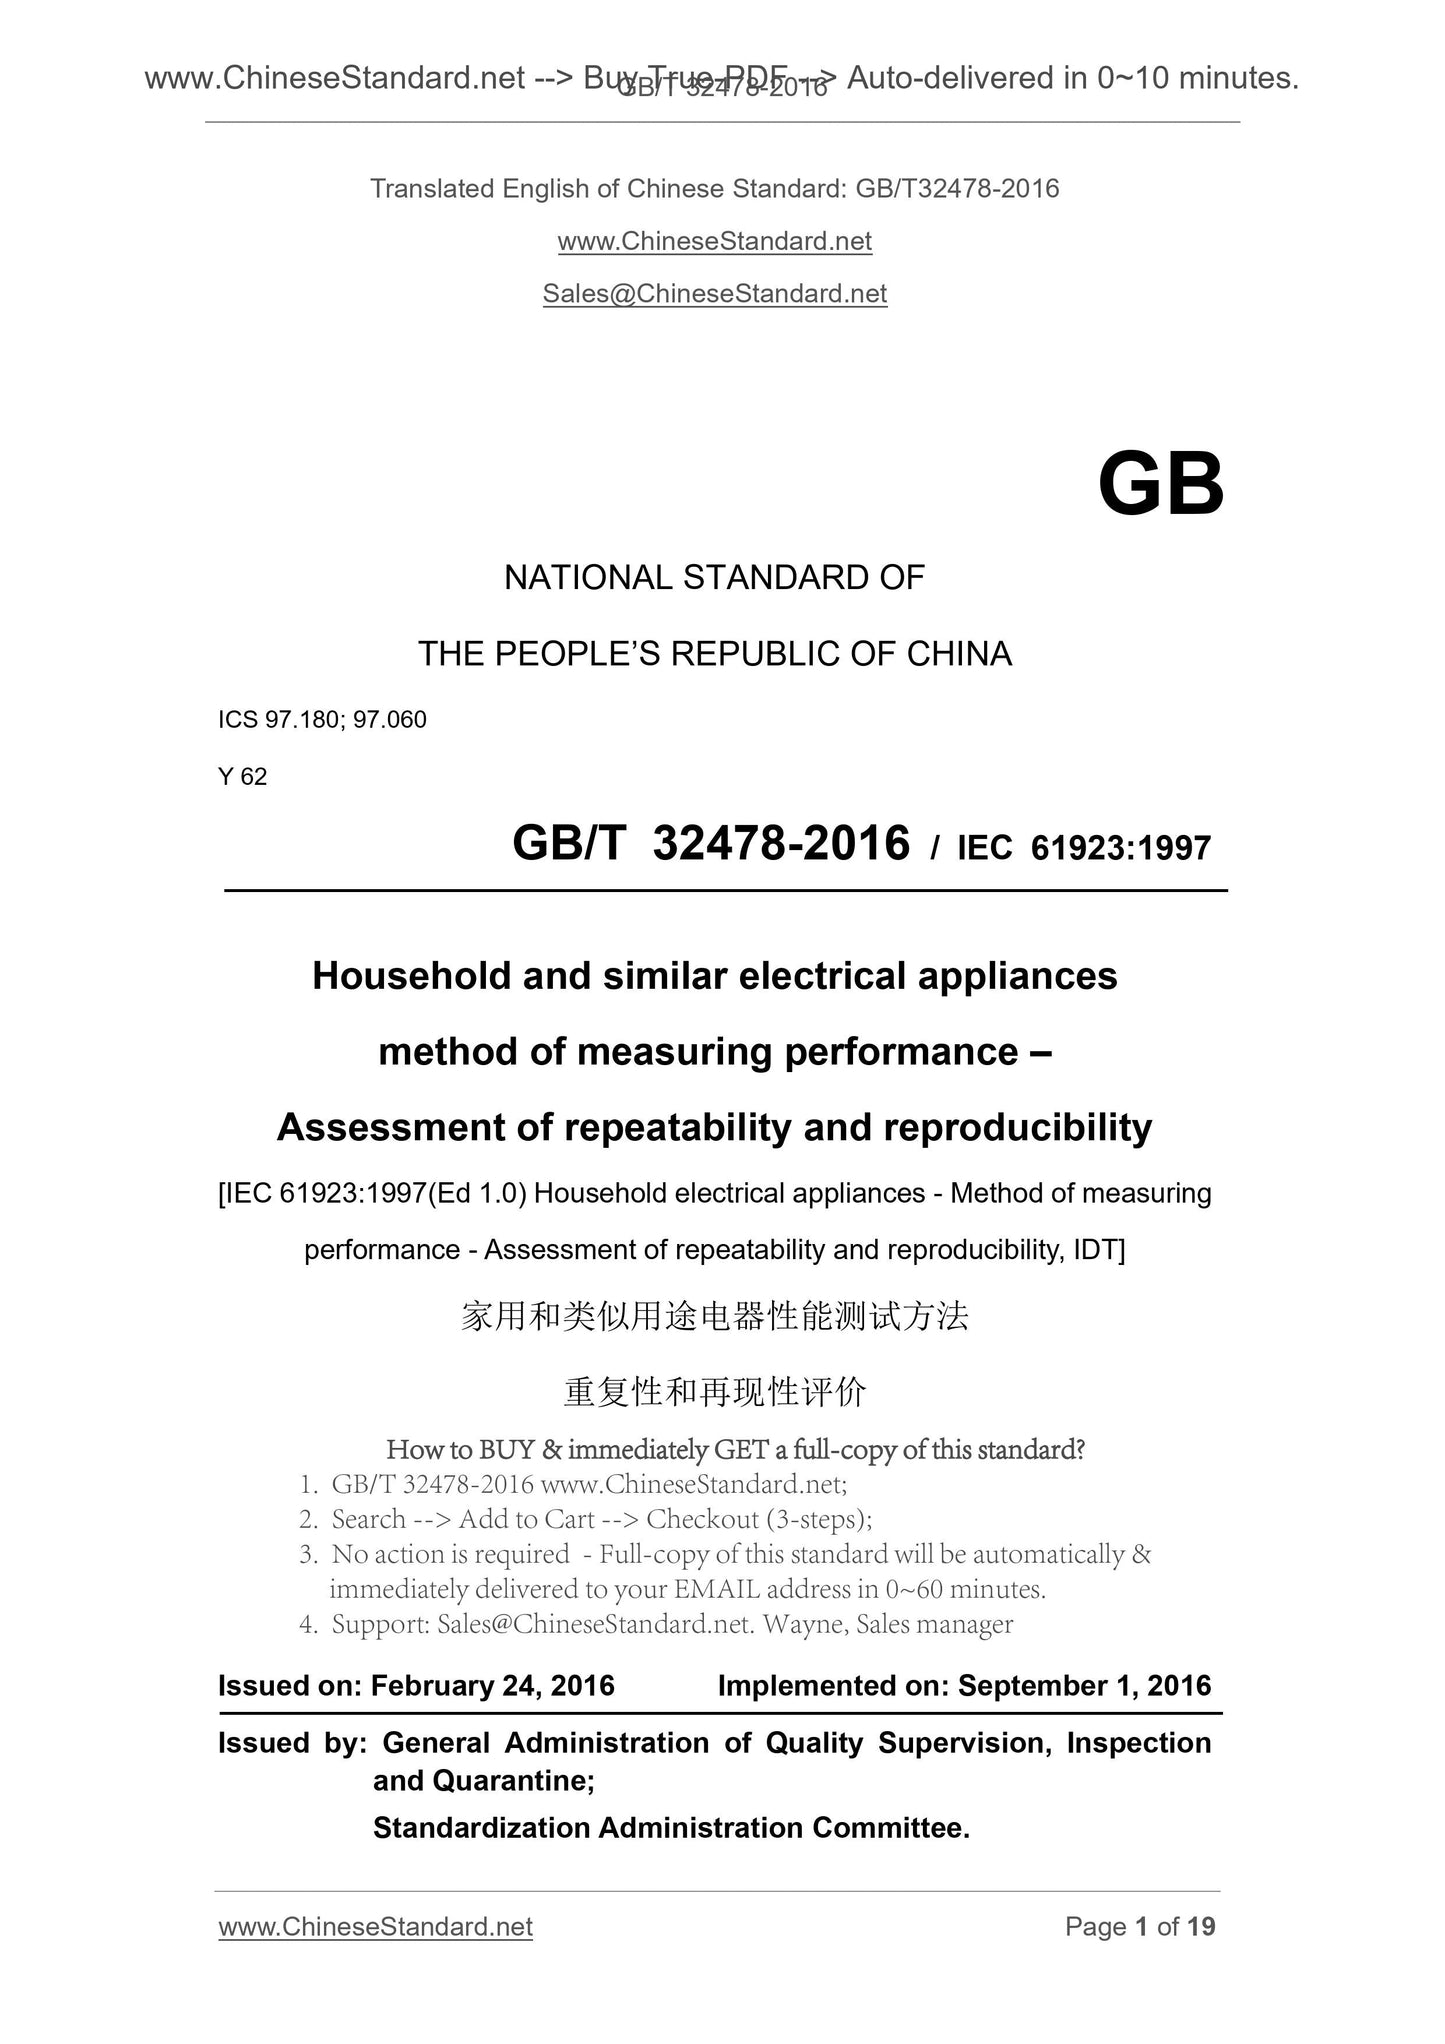 GB/T 32478-2016 Page 1